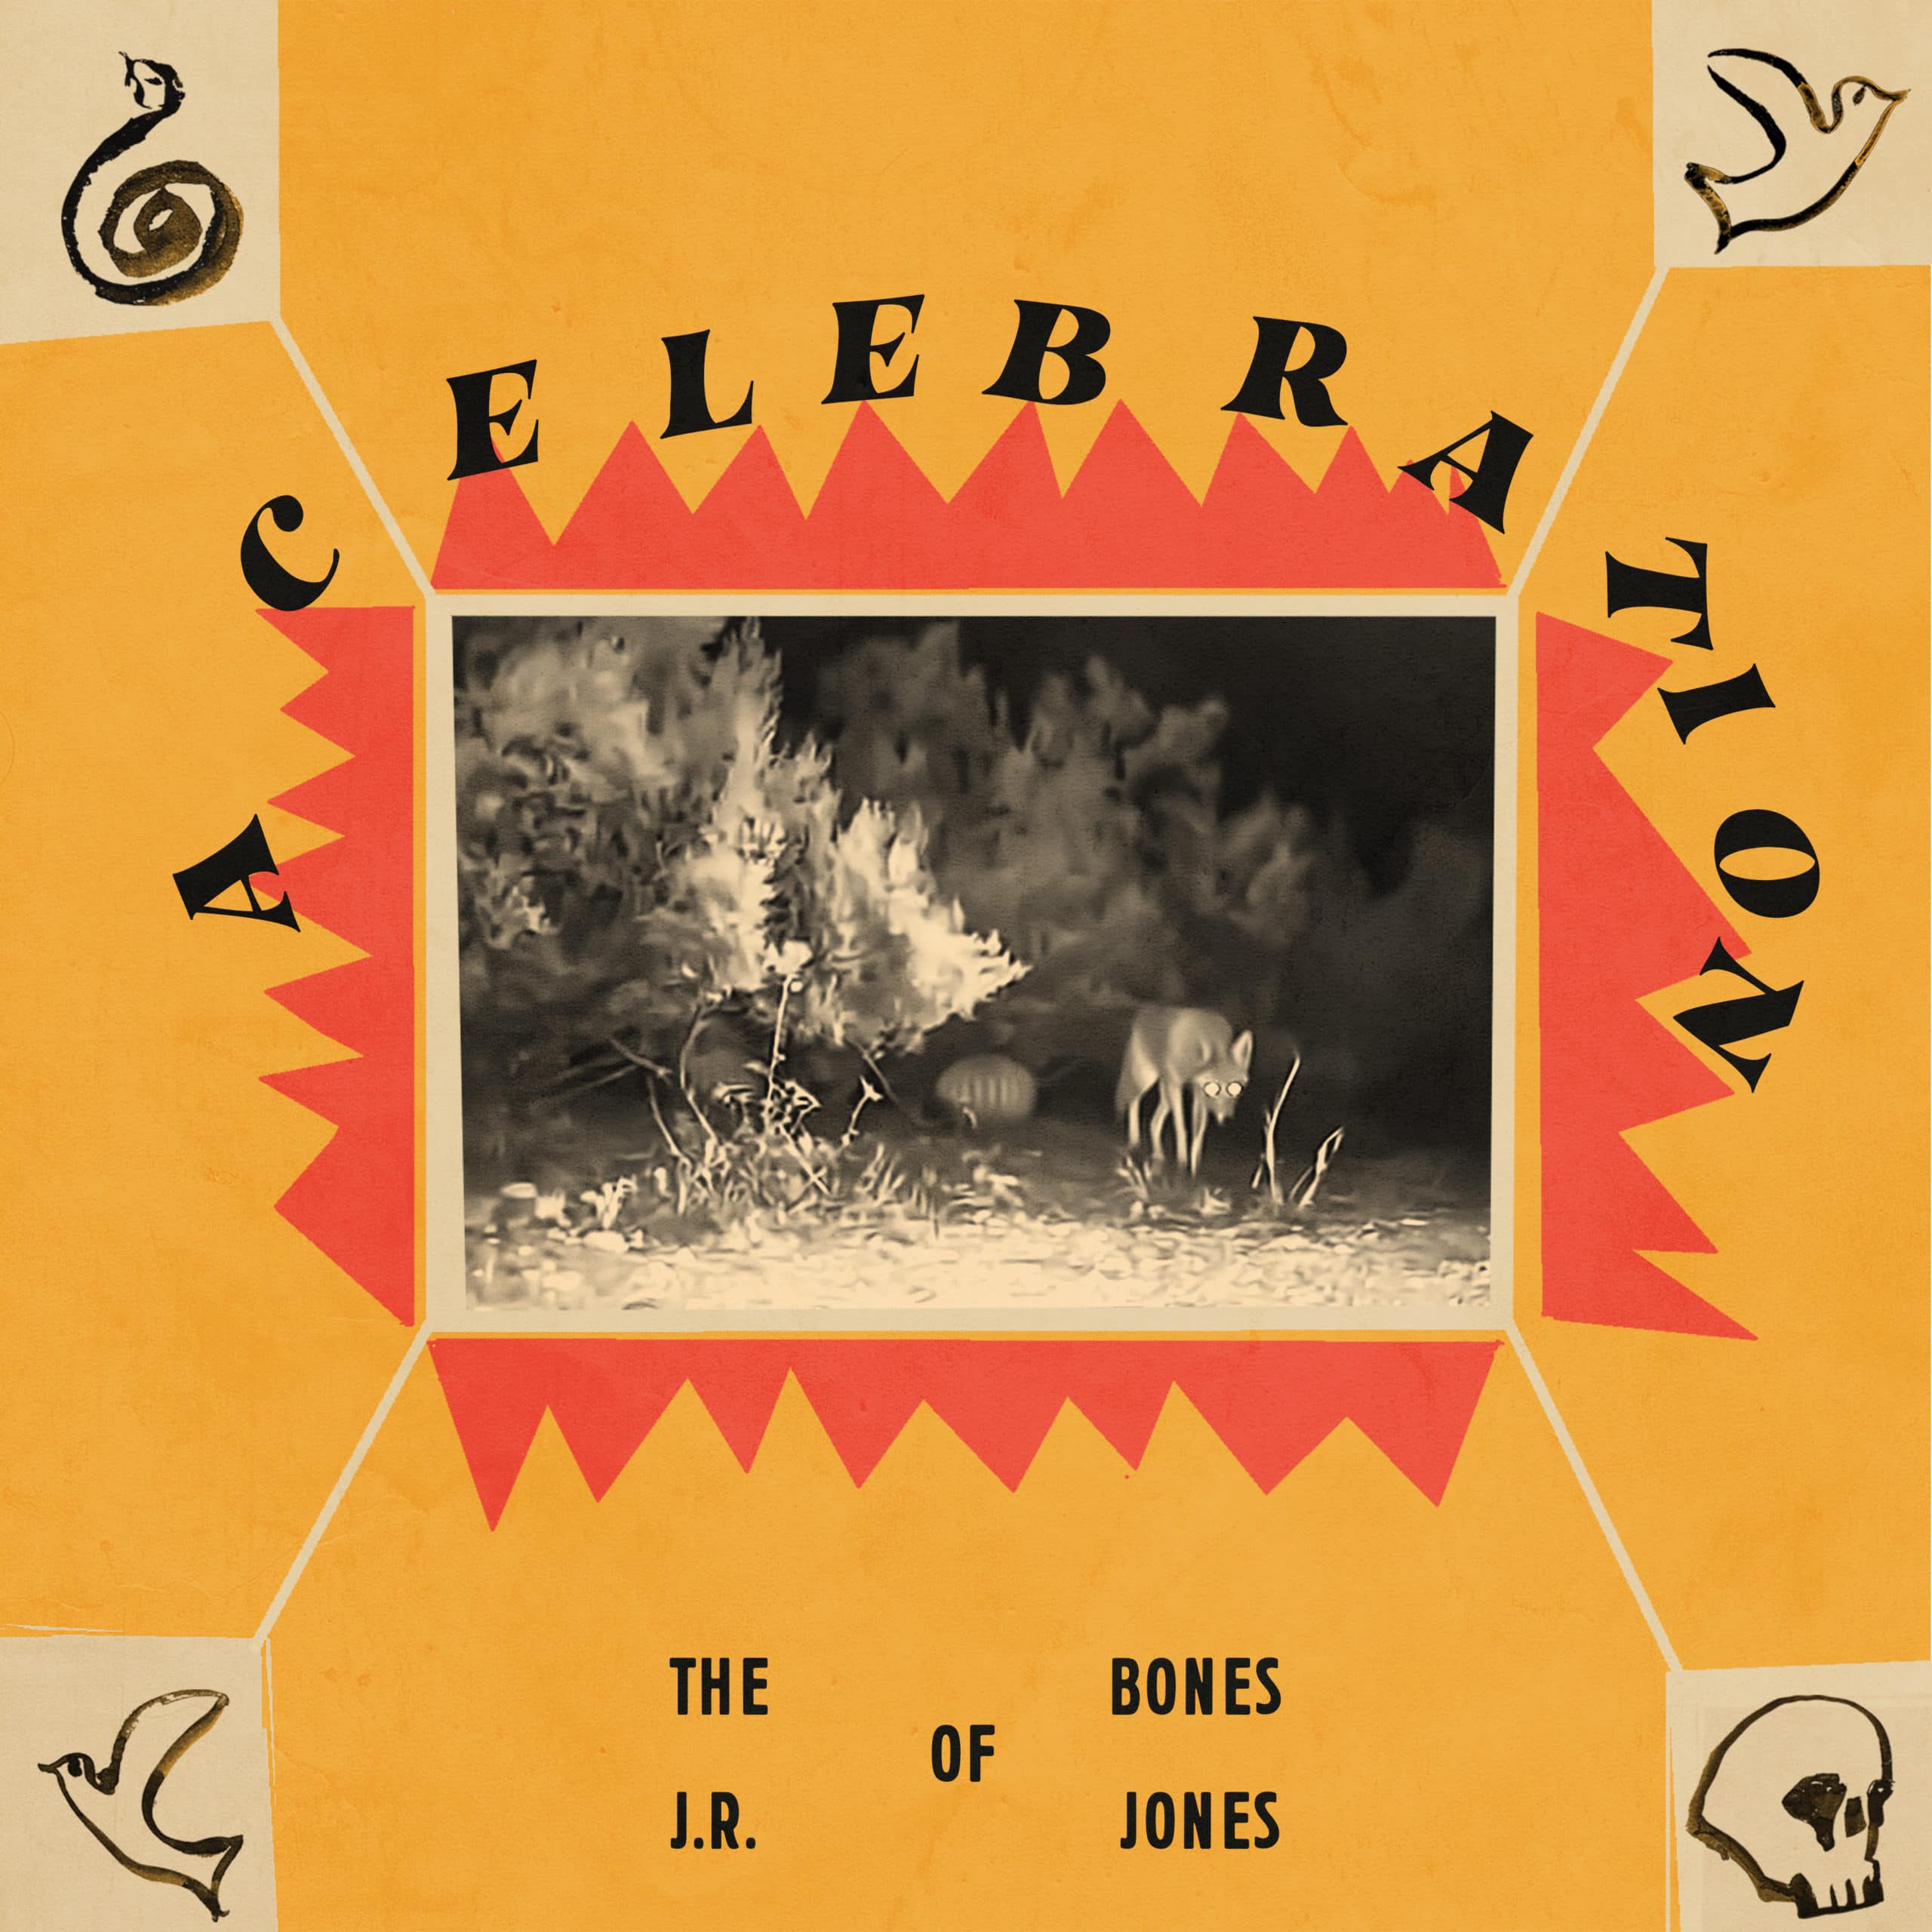 The cover to The Bones of J.R. Jones' EP, A Celebration